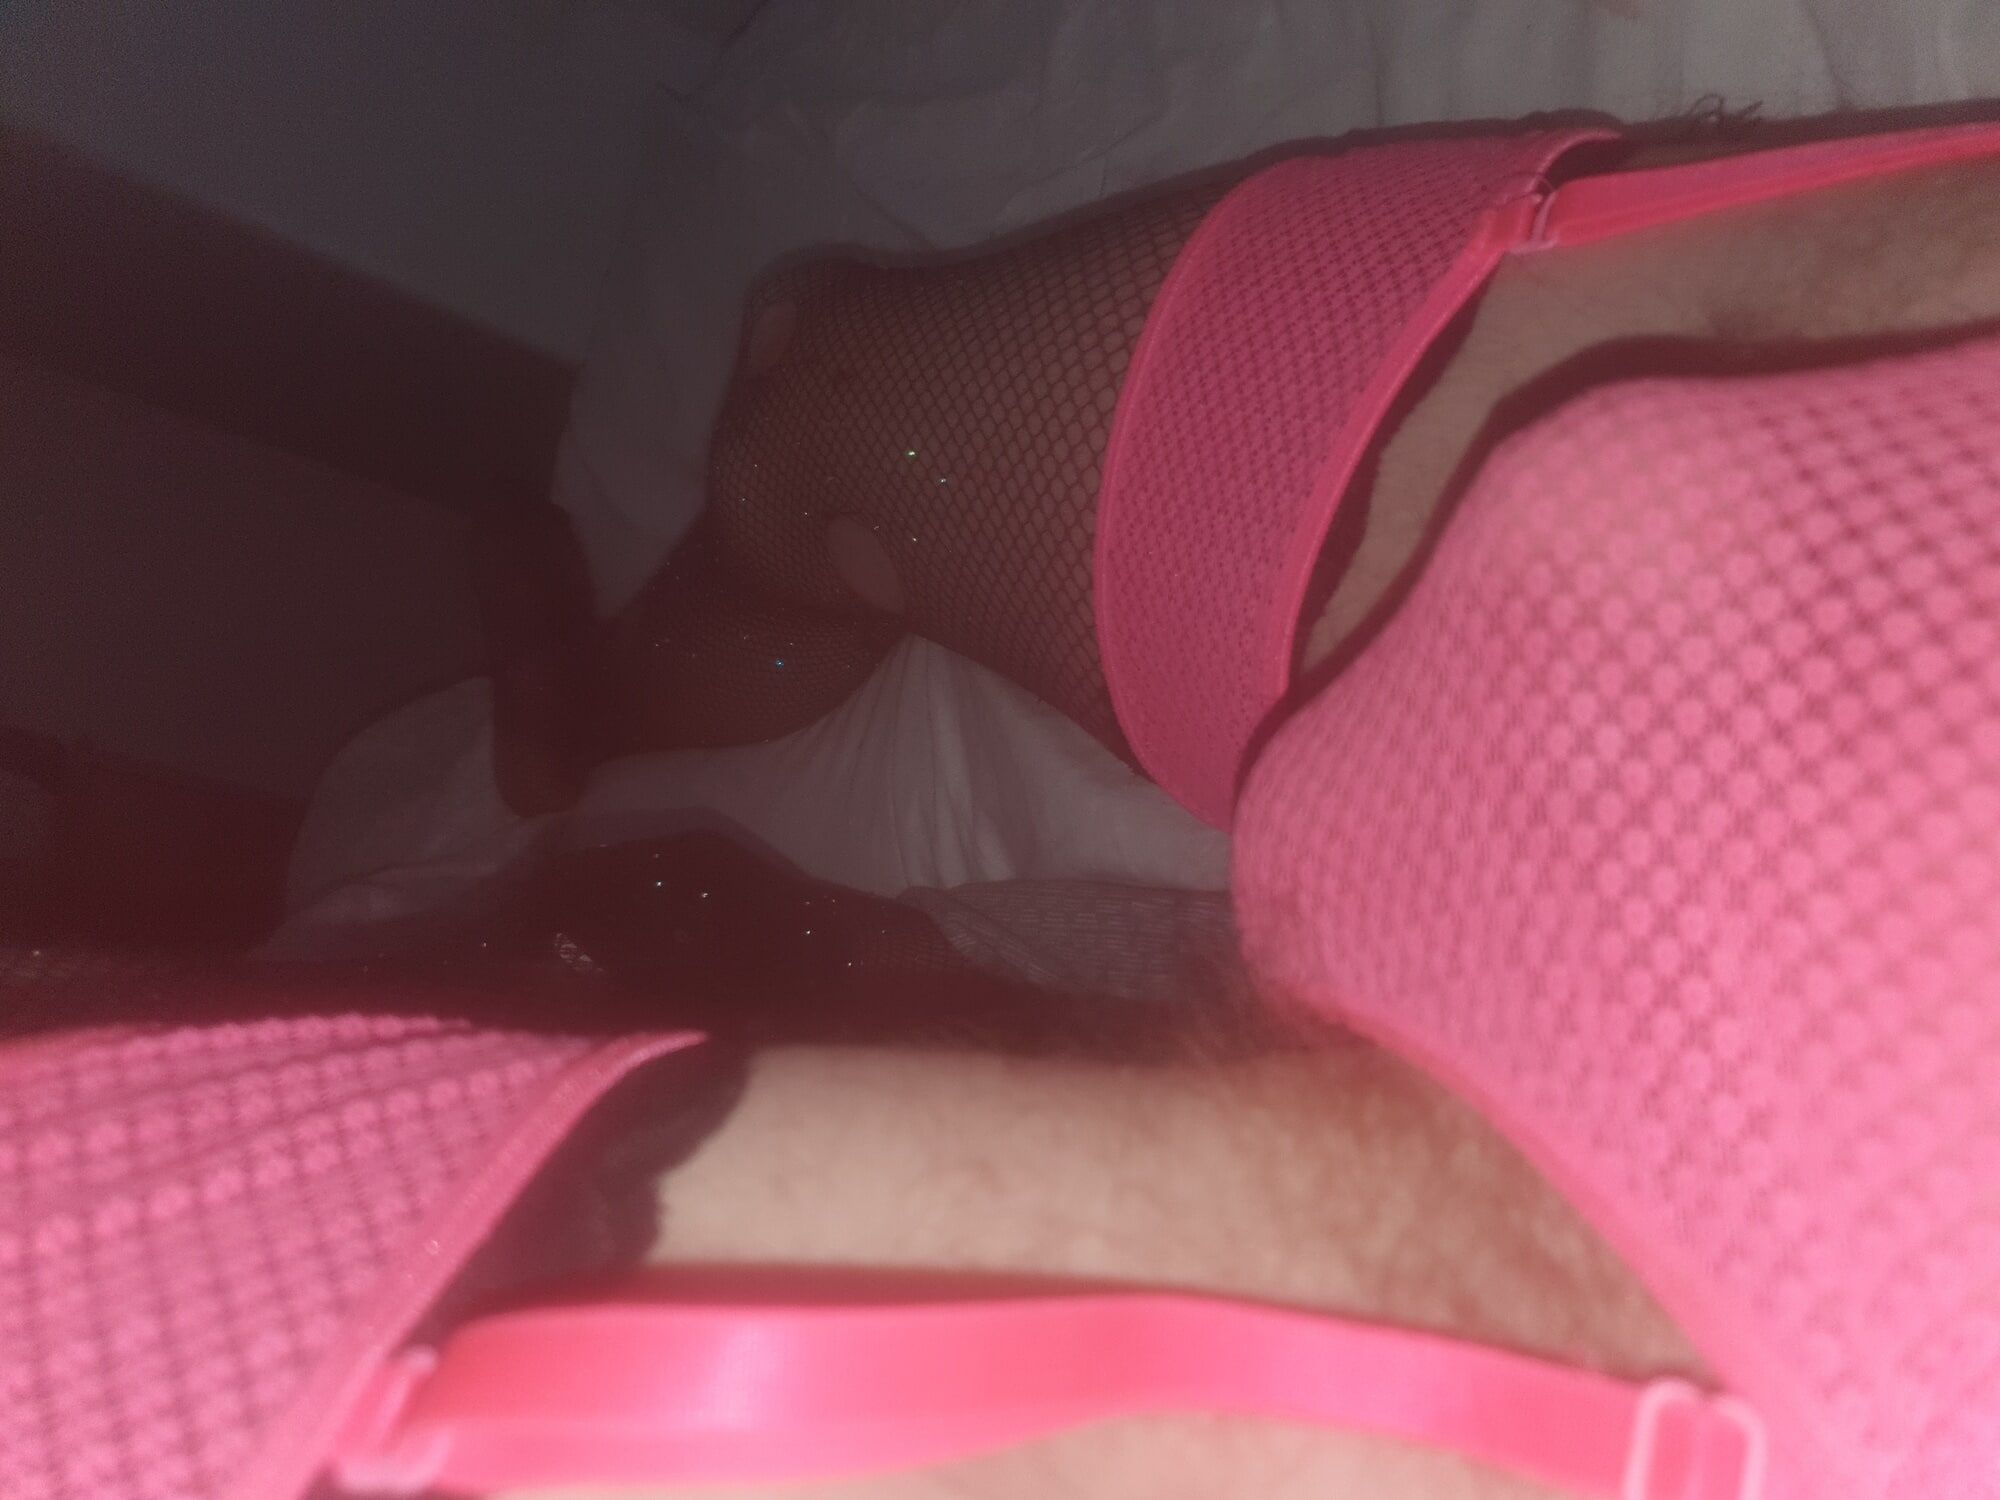 Chav secretly wearing his mums stockings and lingerie 